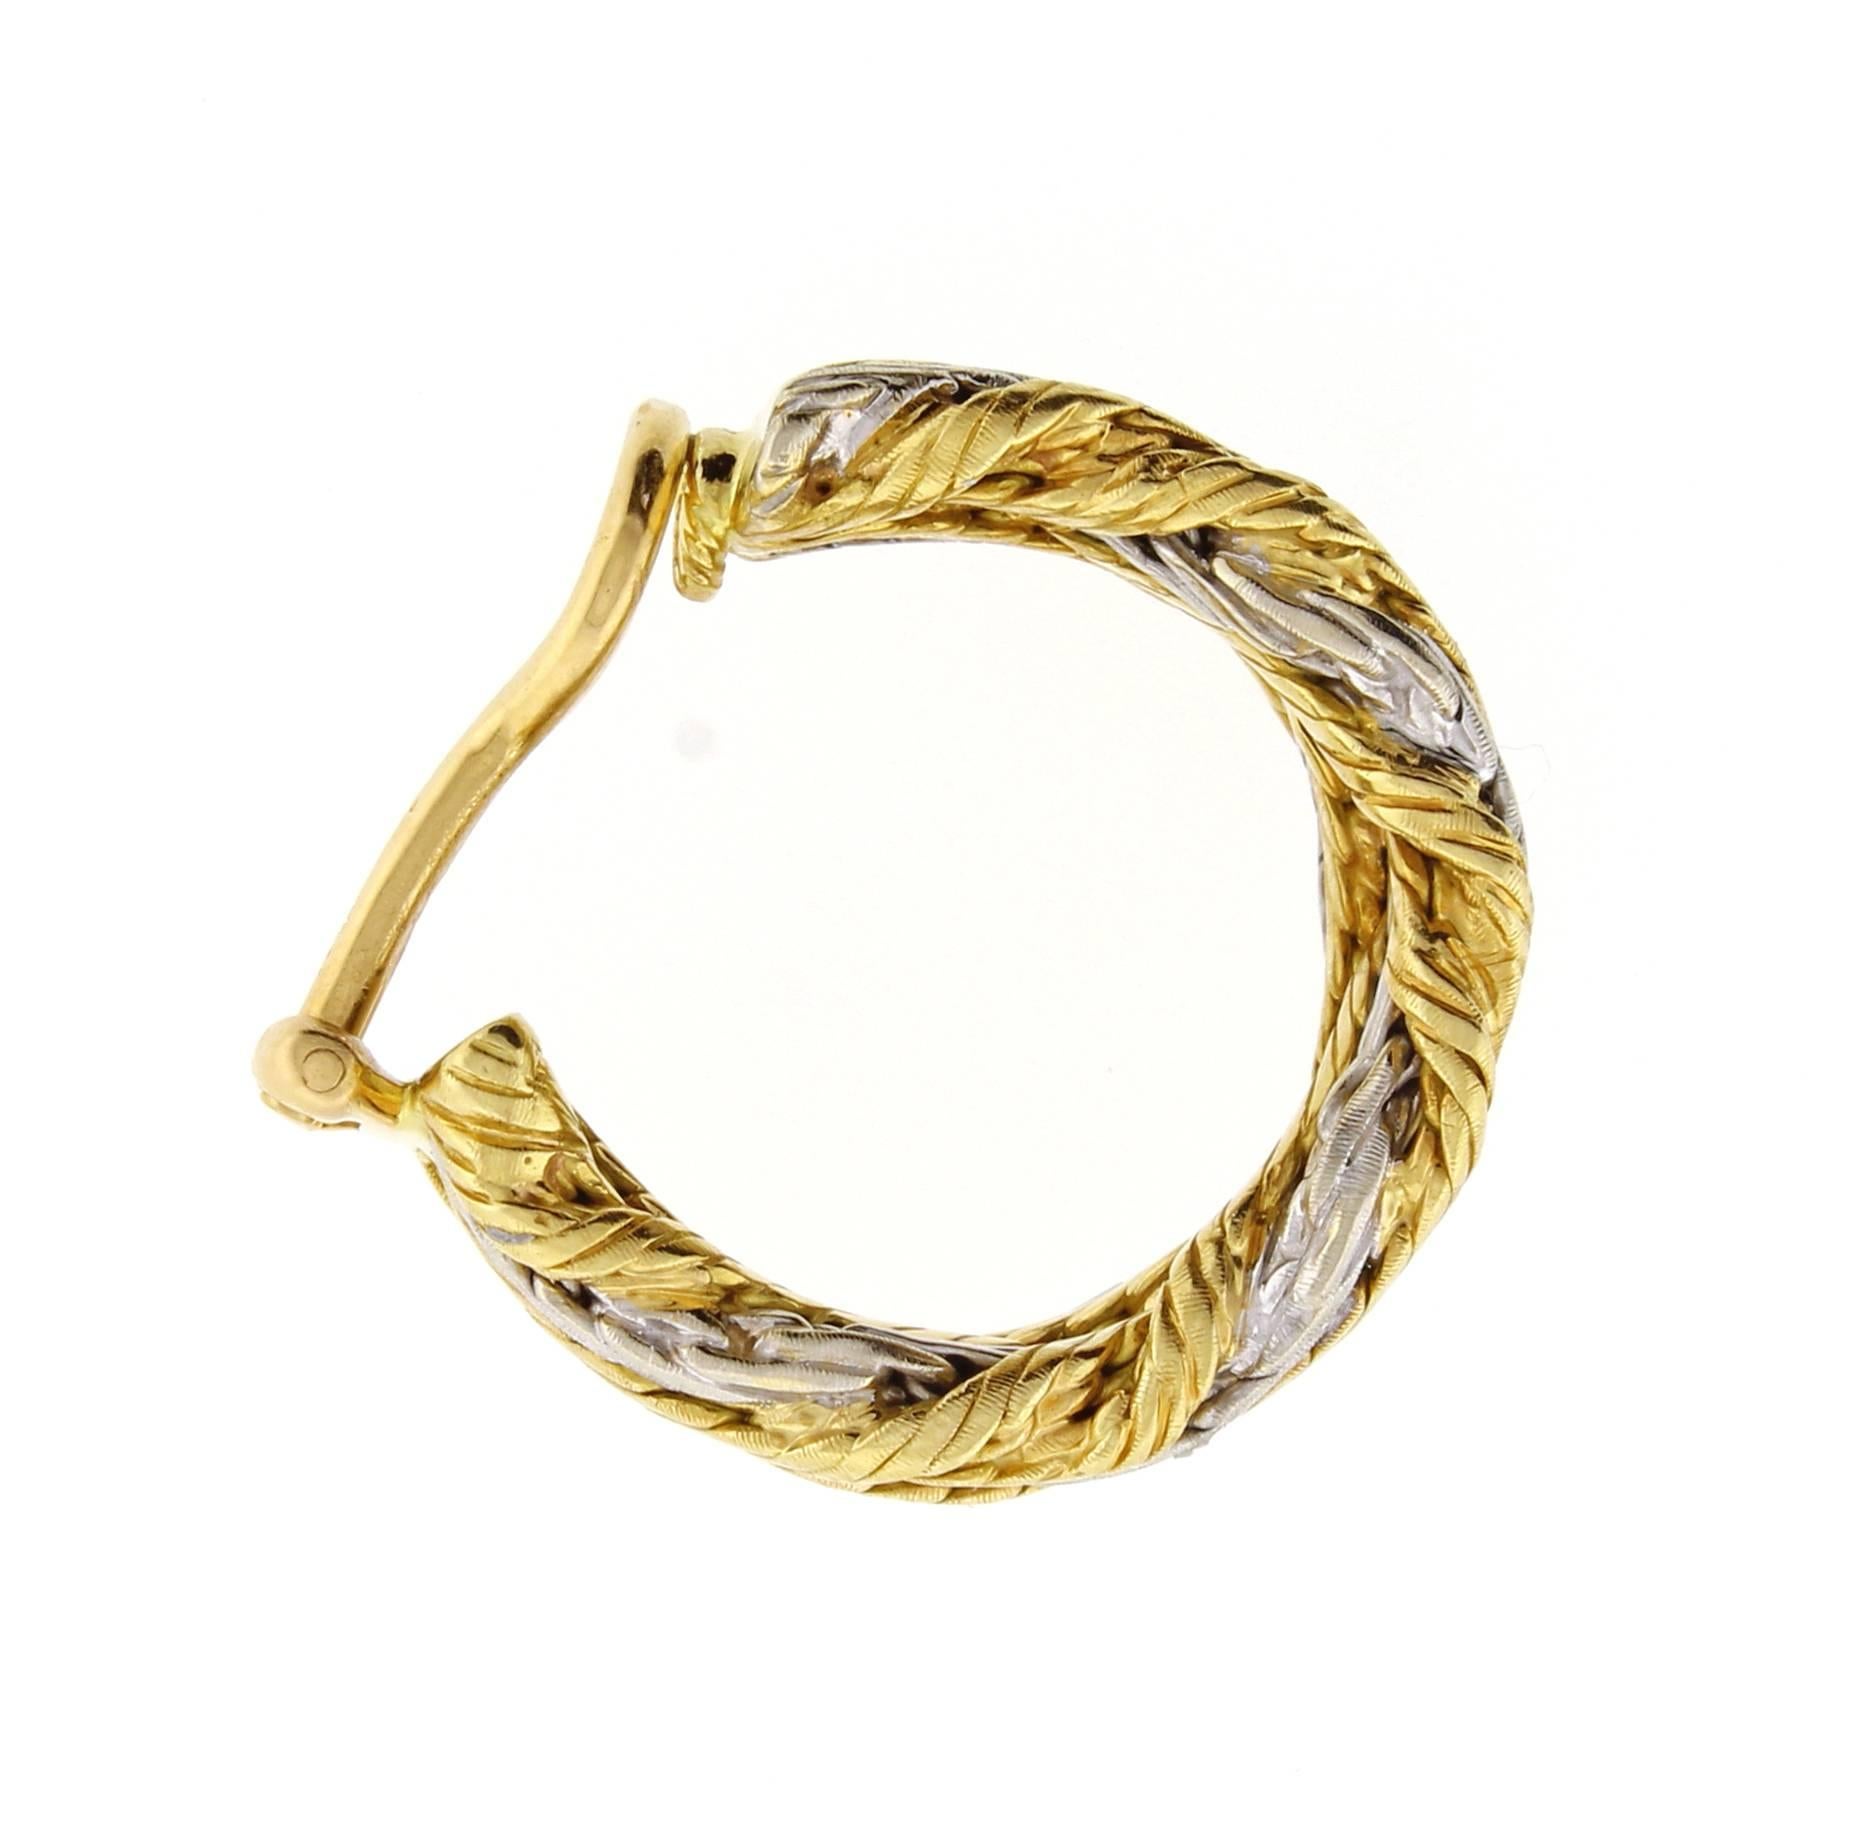 From Buccellati, a pair of white and yellow 18 karat gold braided earrings. The earrings are 3/8 of an inch wide and 7/8 of and in high.15.4 grams